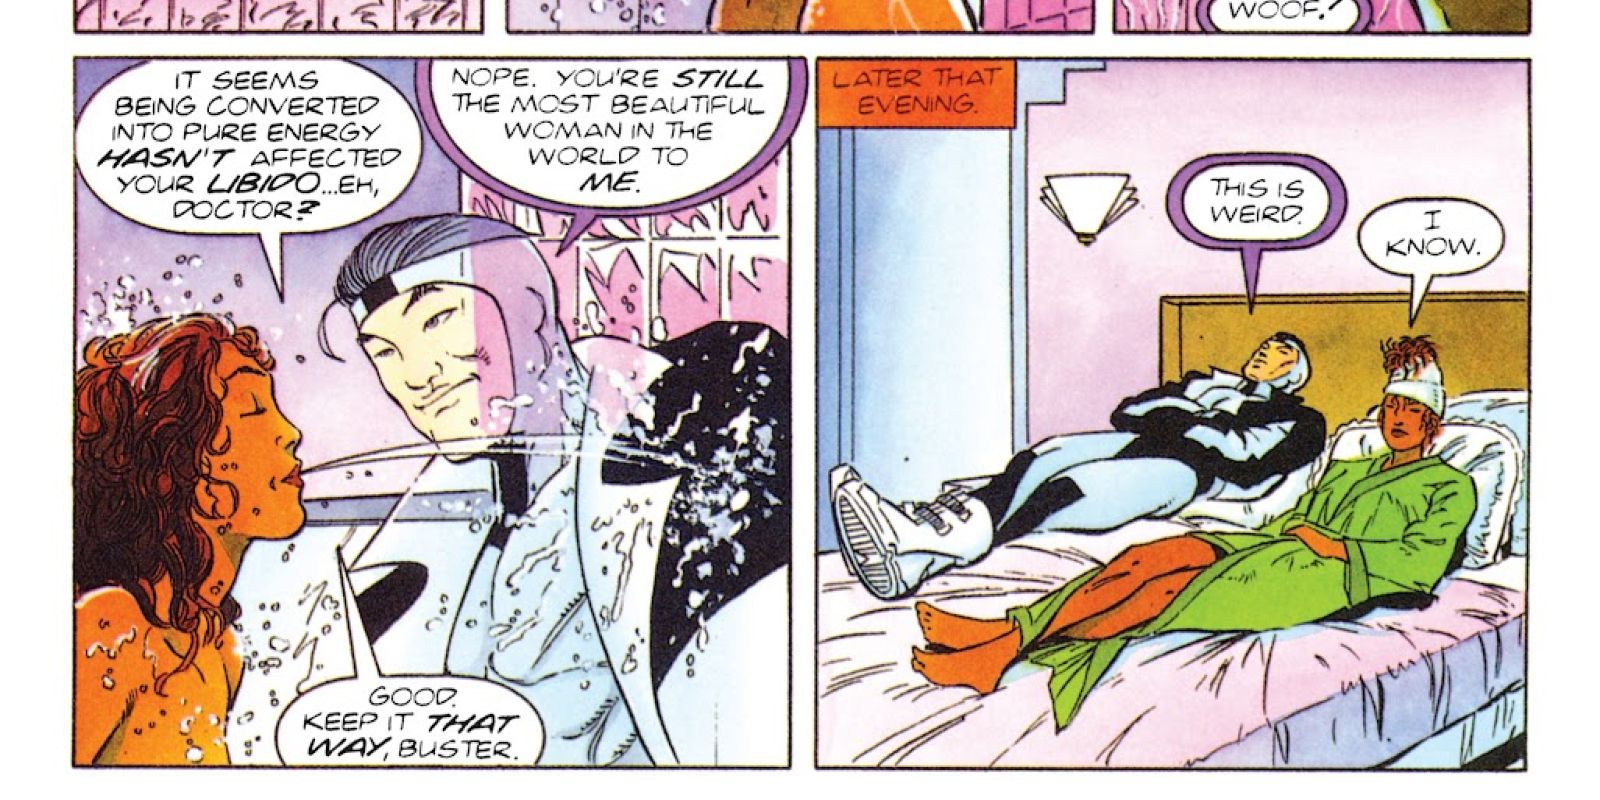 Doctor Mirage has a conversation in bed beside his wife.